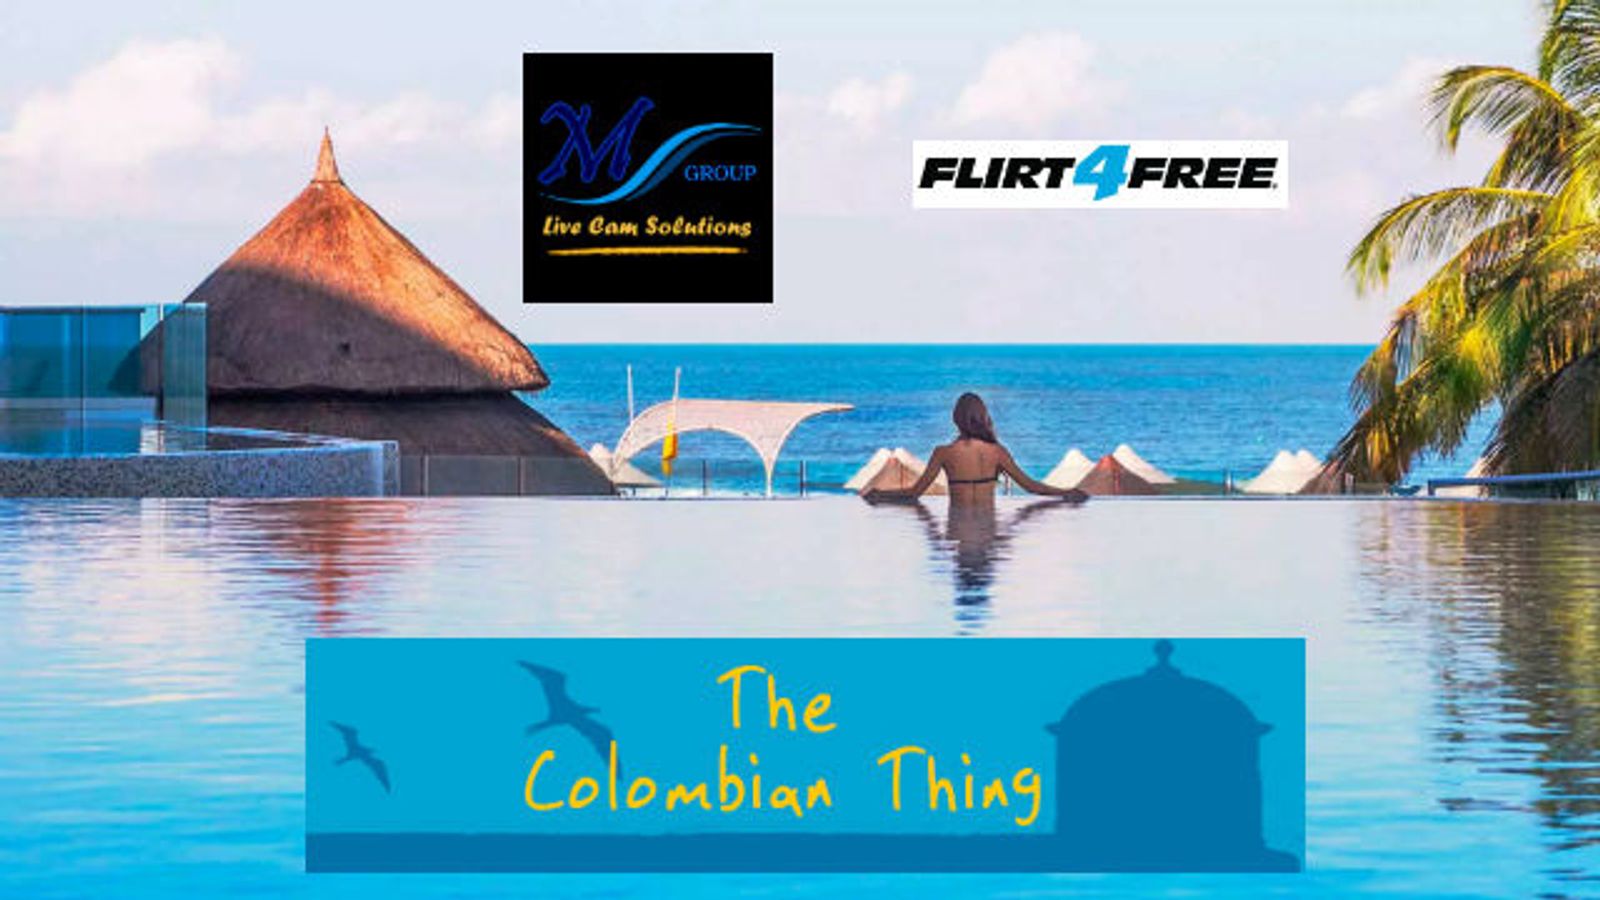 Flirt4Free, M Group Team for Colombian Gathering in August